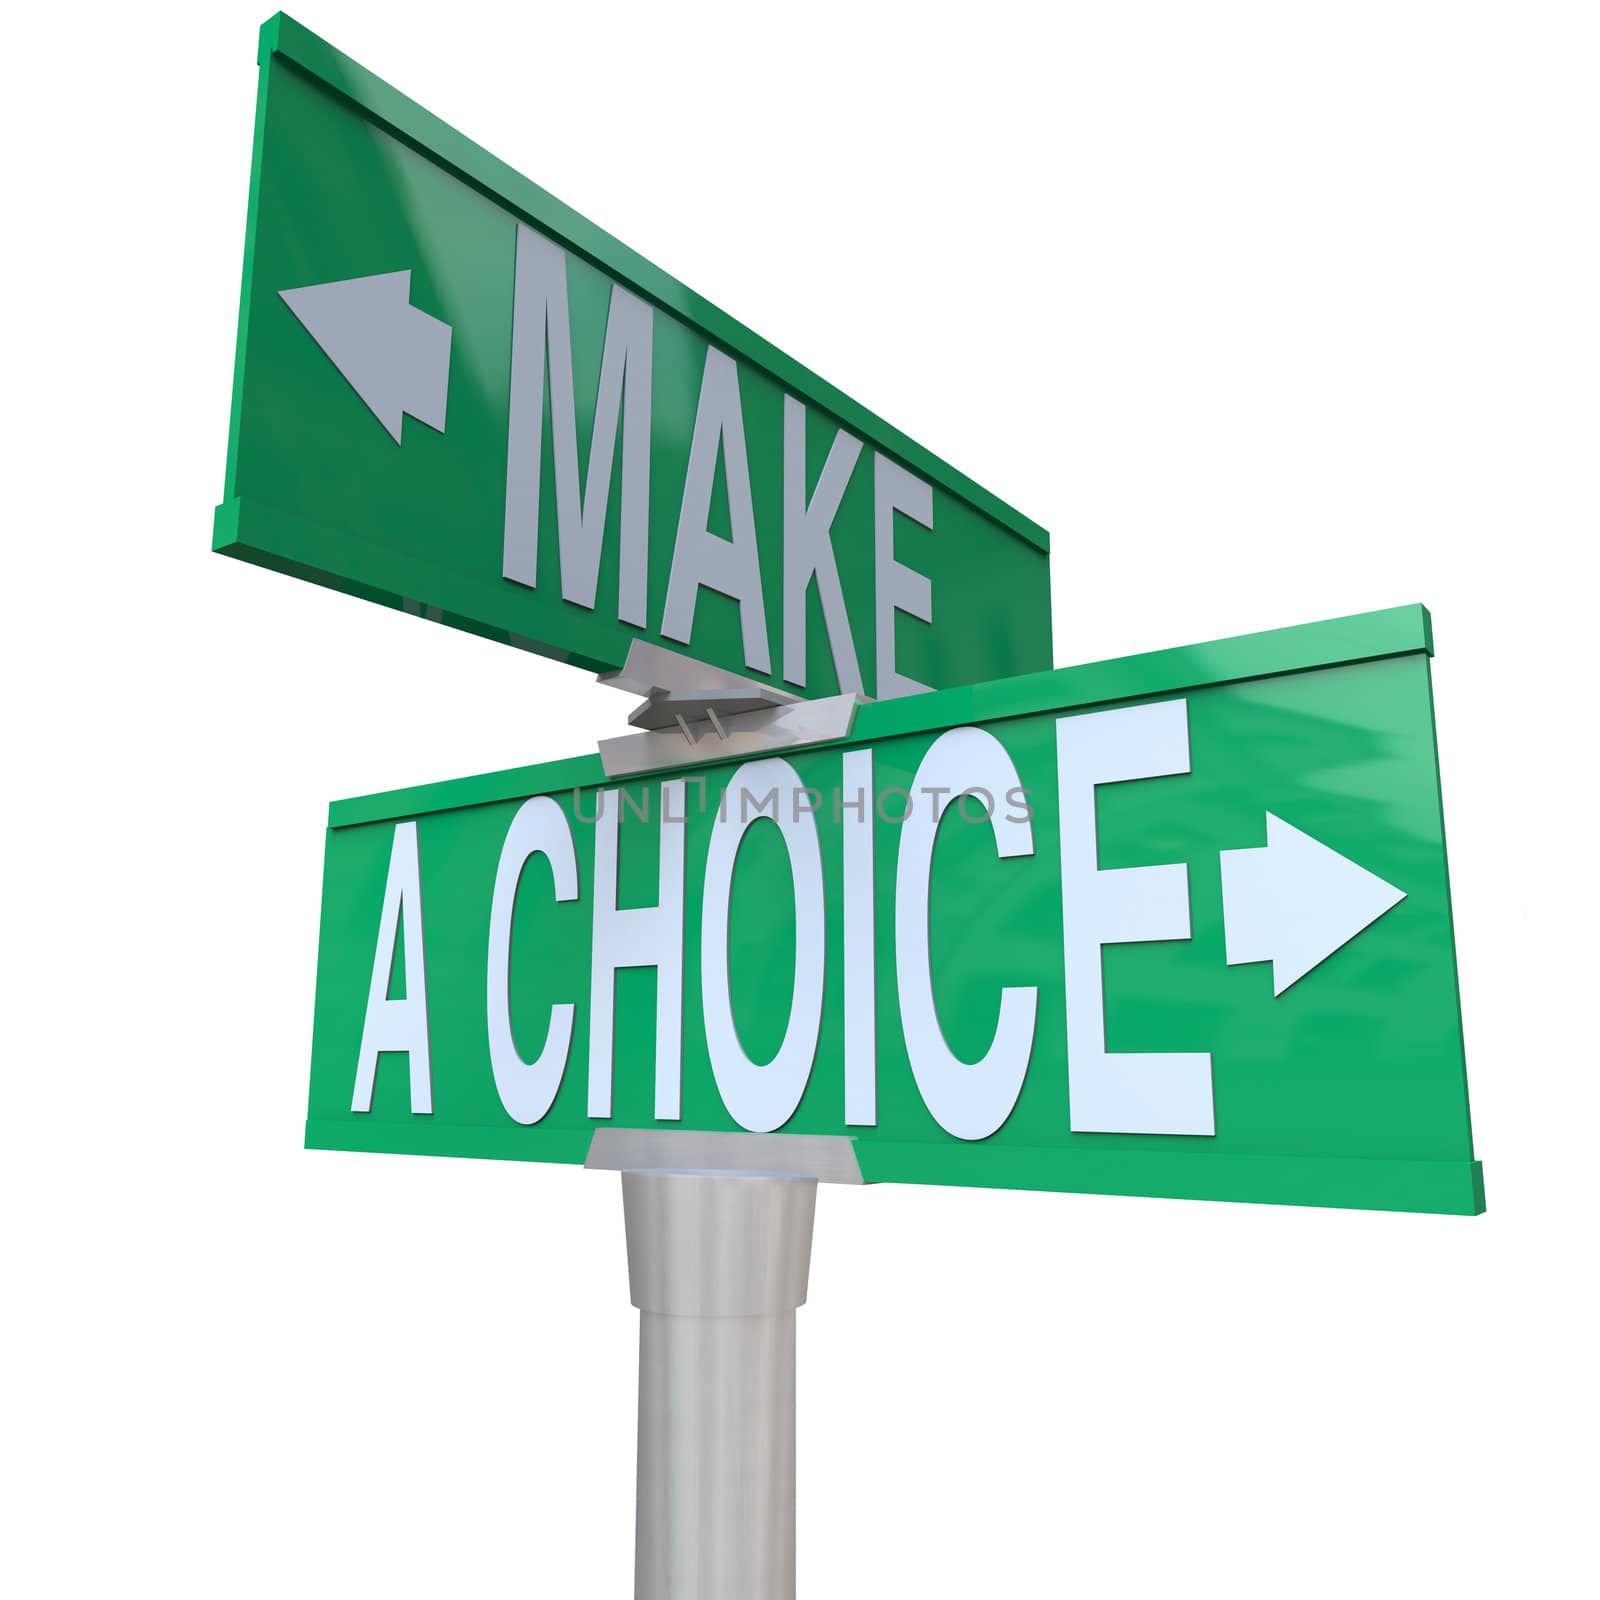 A green two-way street sign pointing to the words Make a Choice, illustrating the need to decide between 2 different alternatives in business or life in general